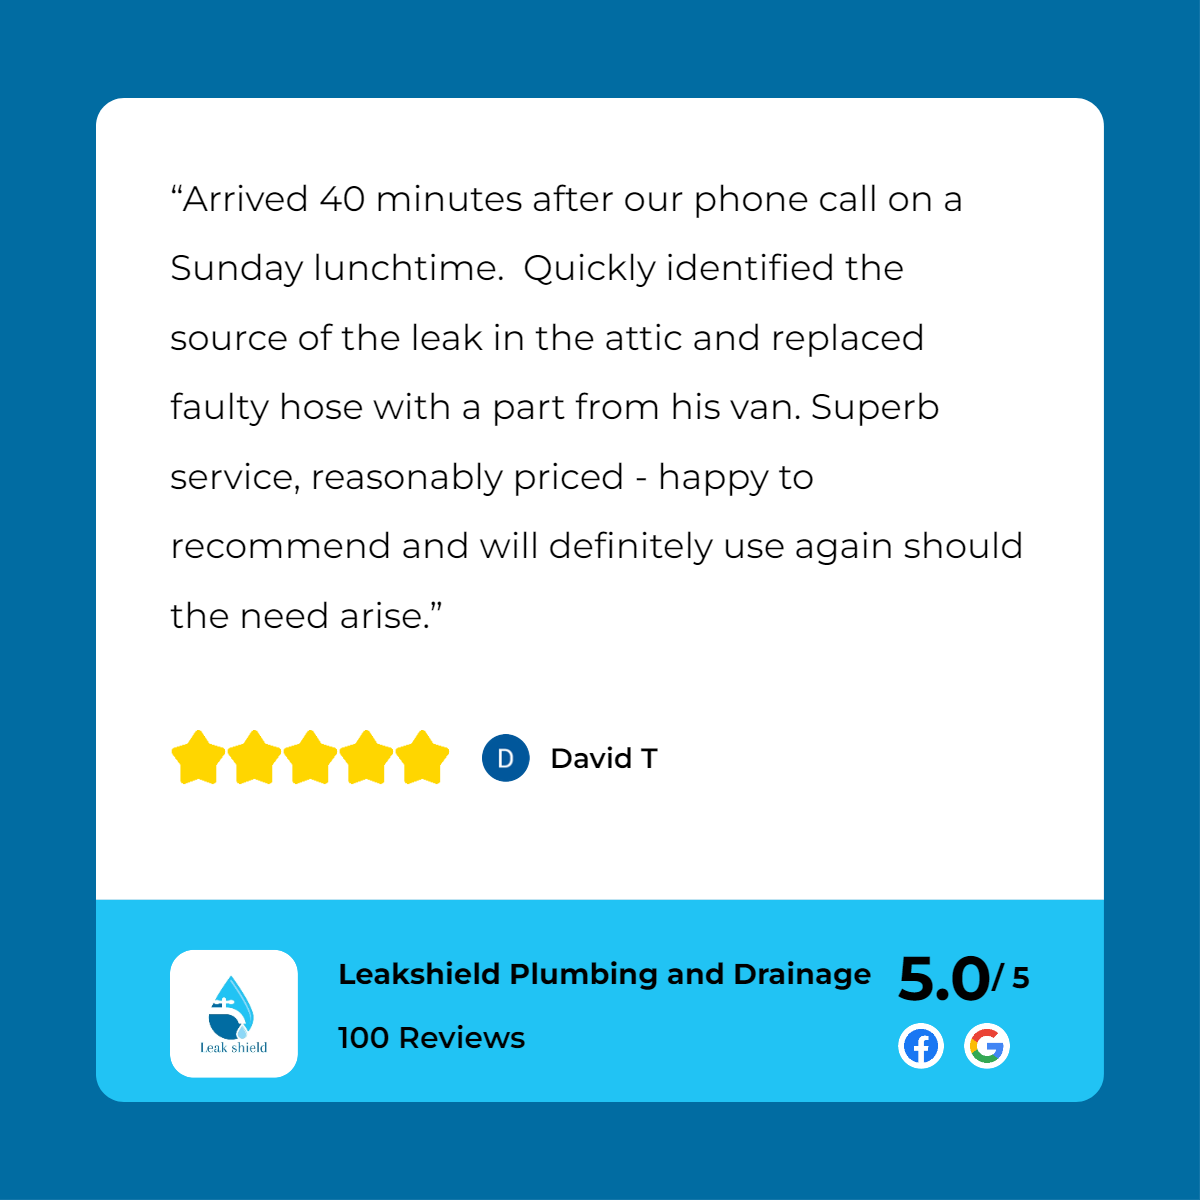 A customer review for a plumbing company.